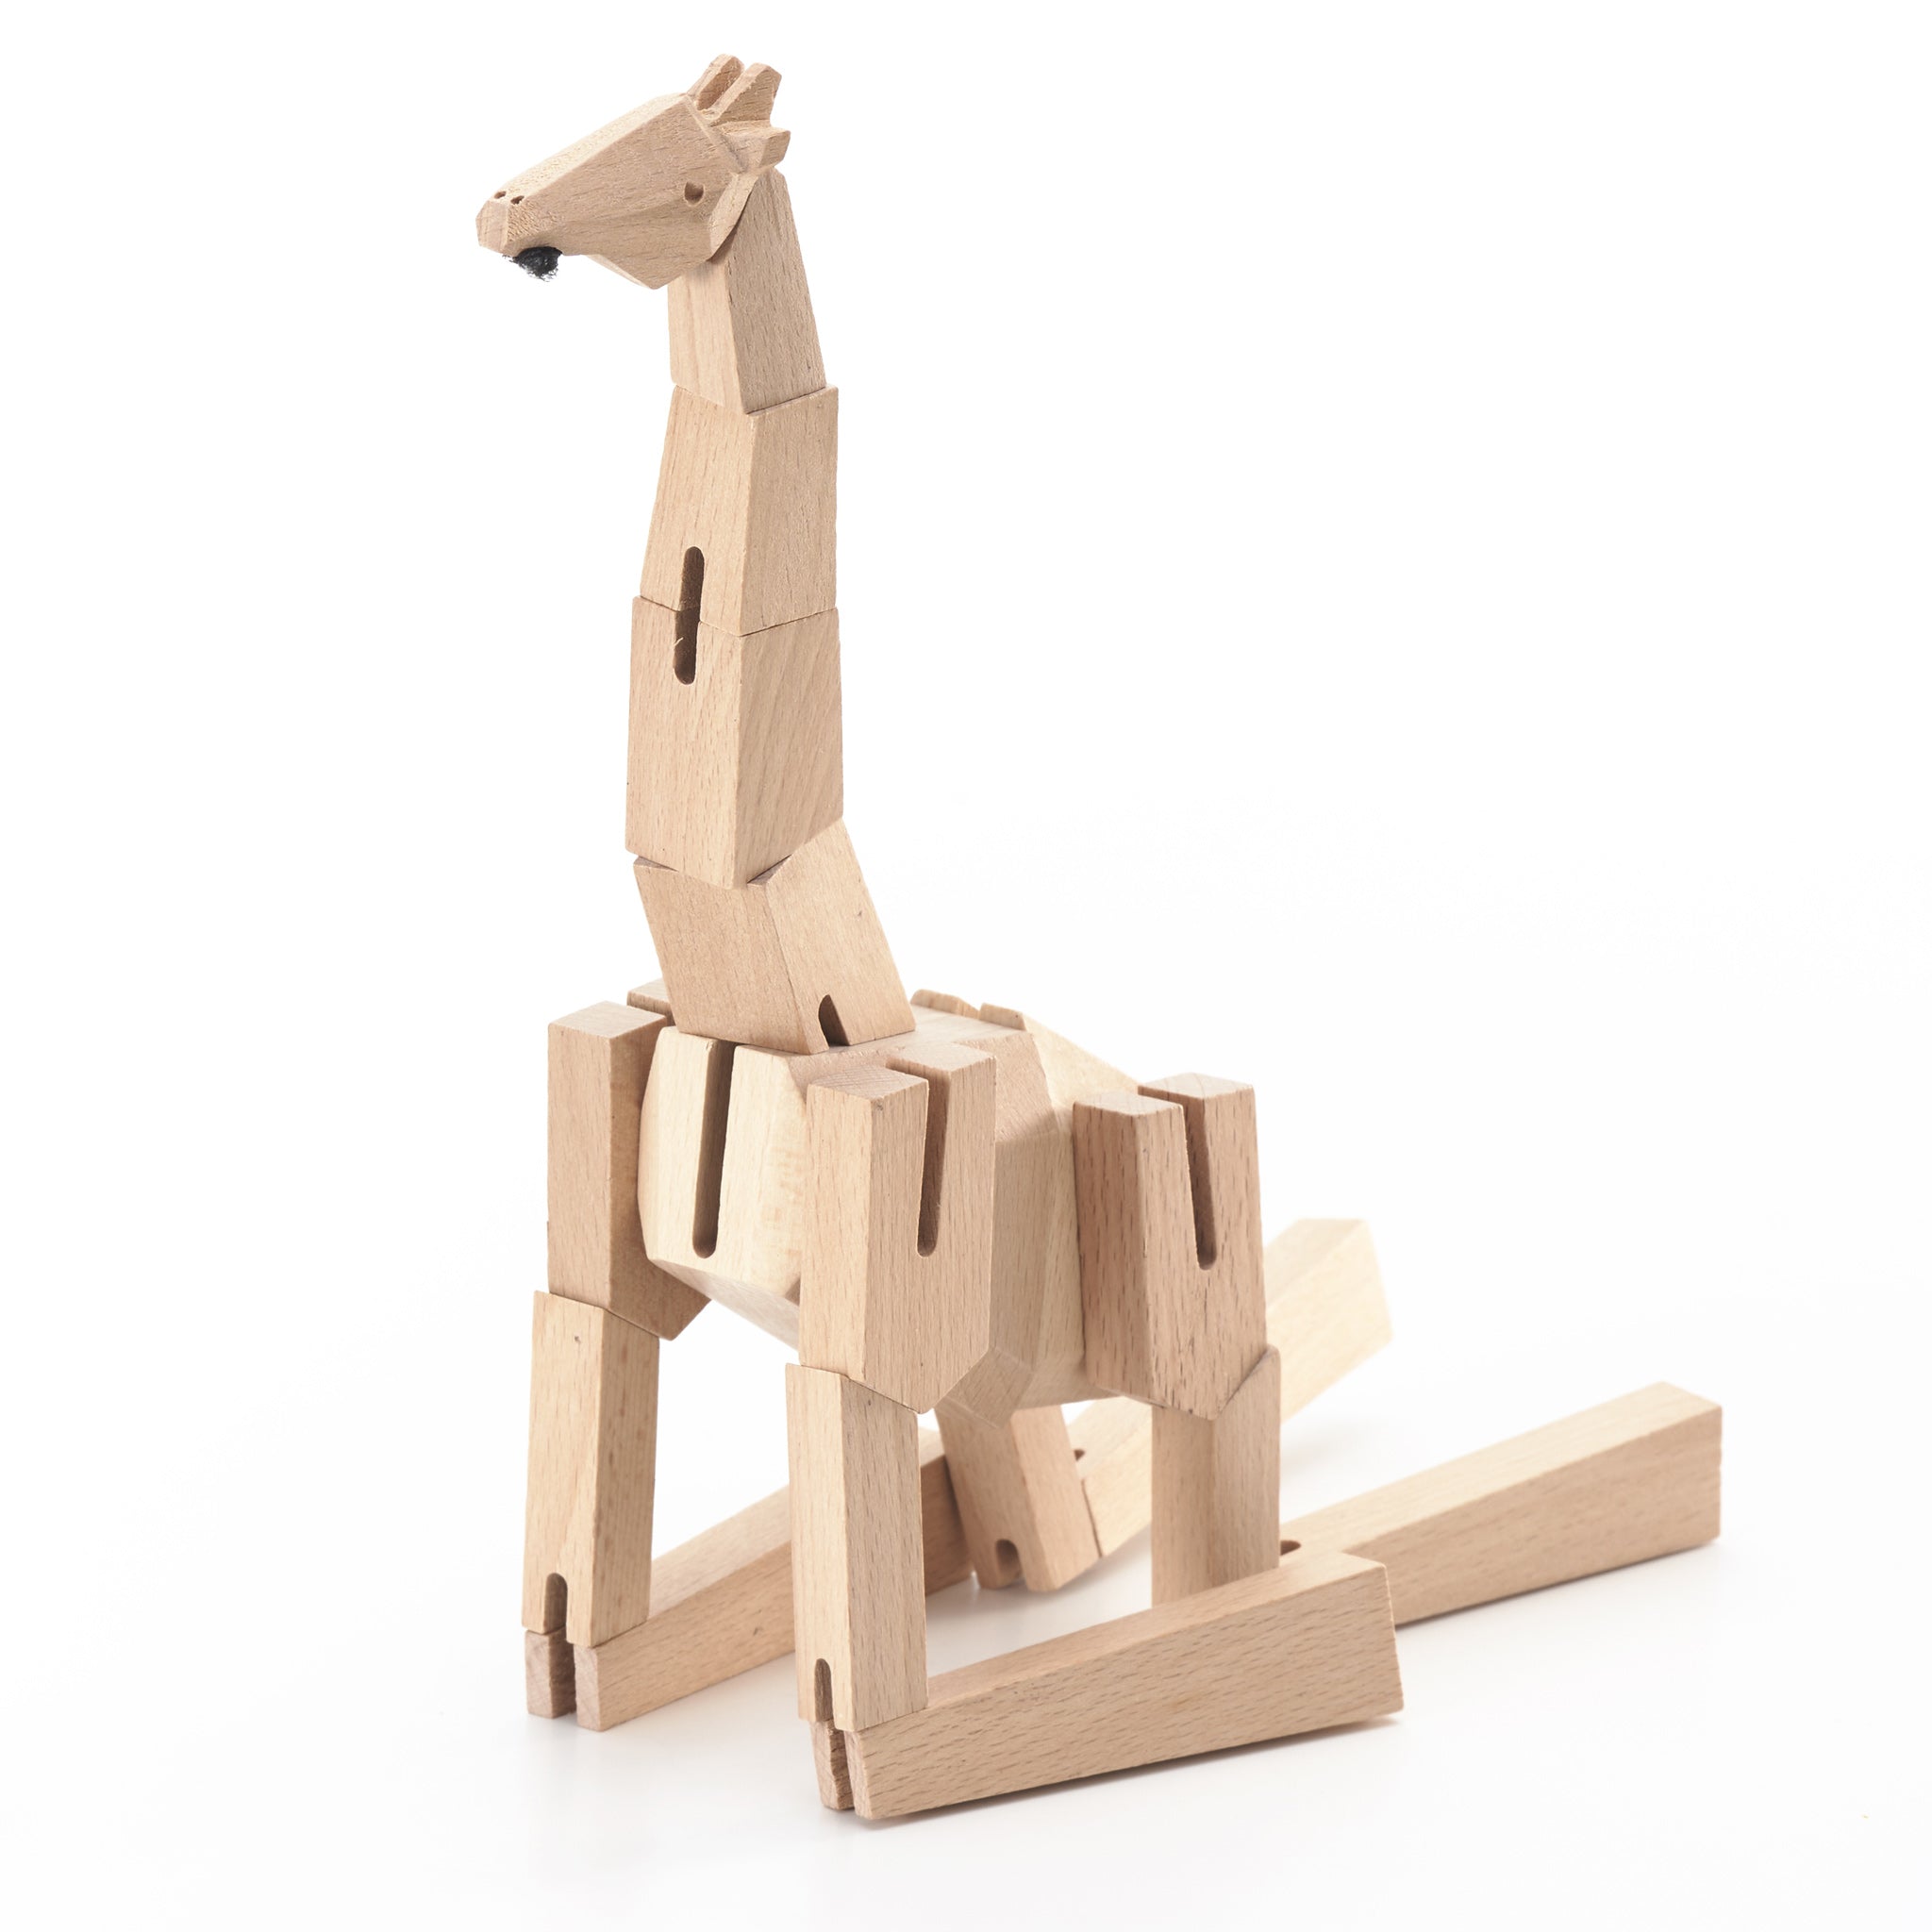 Morphits ® Giraffe Wooden Toy: Elevate Playtime with Tall Tales in our Wooden Playset World - Yoshiaki Ito Design squat N1